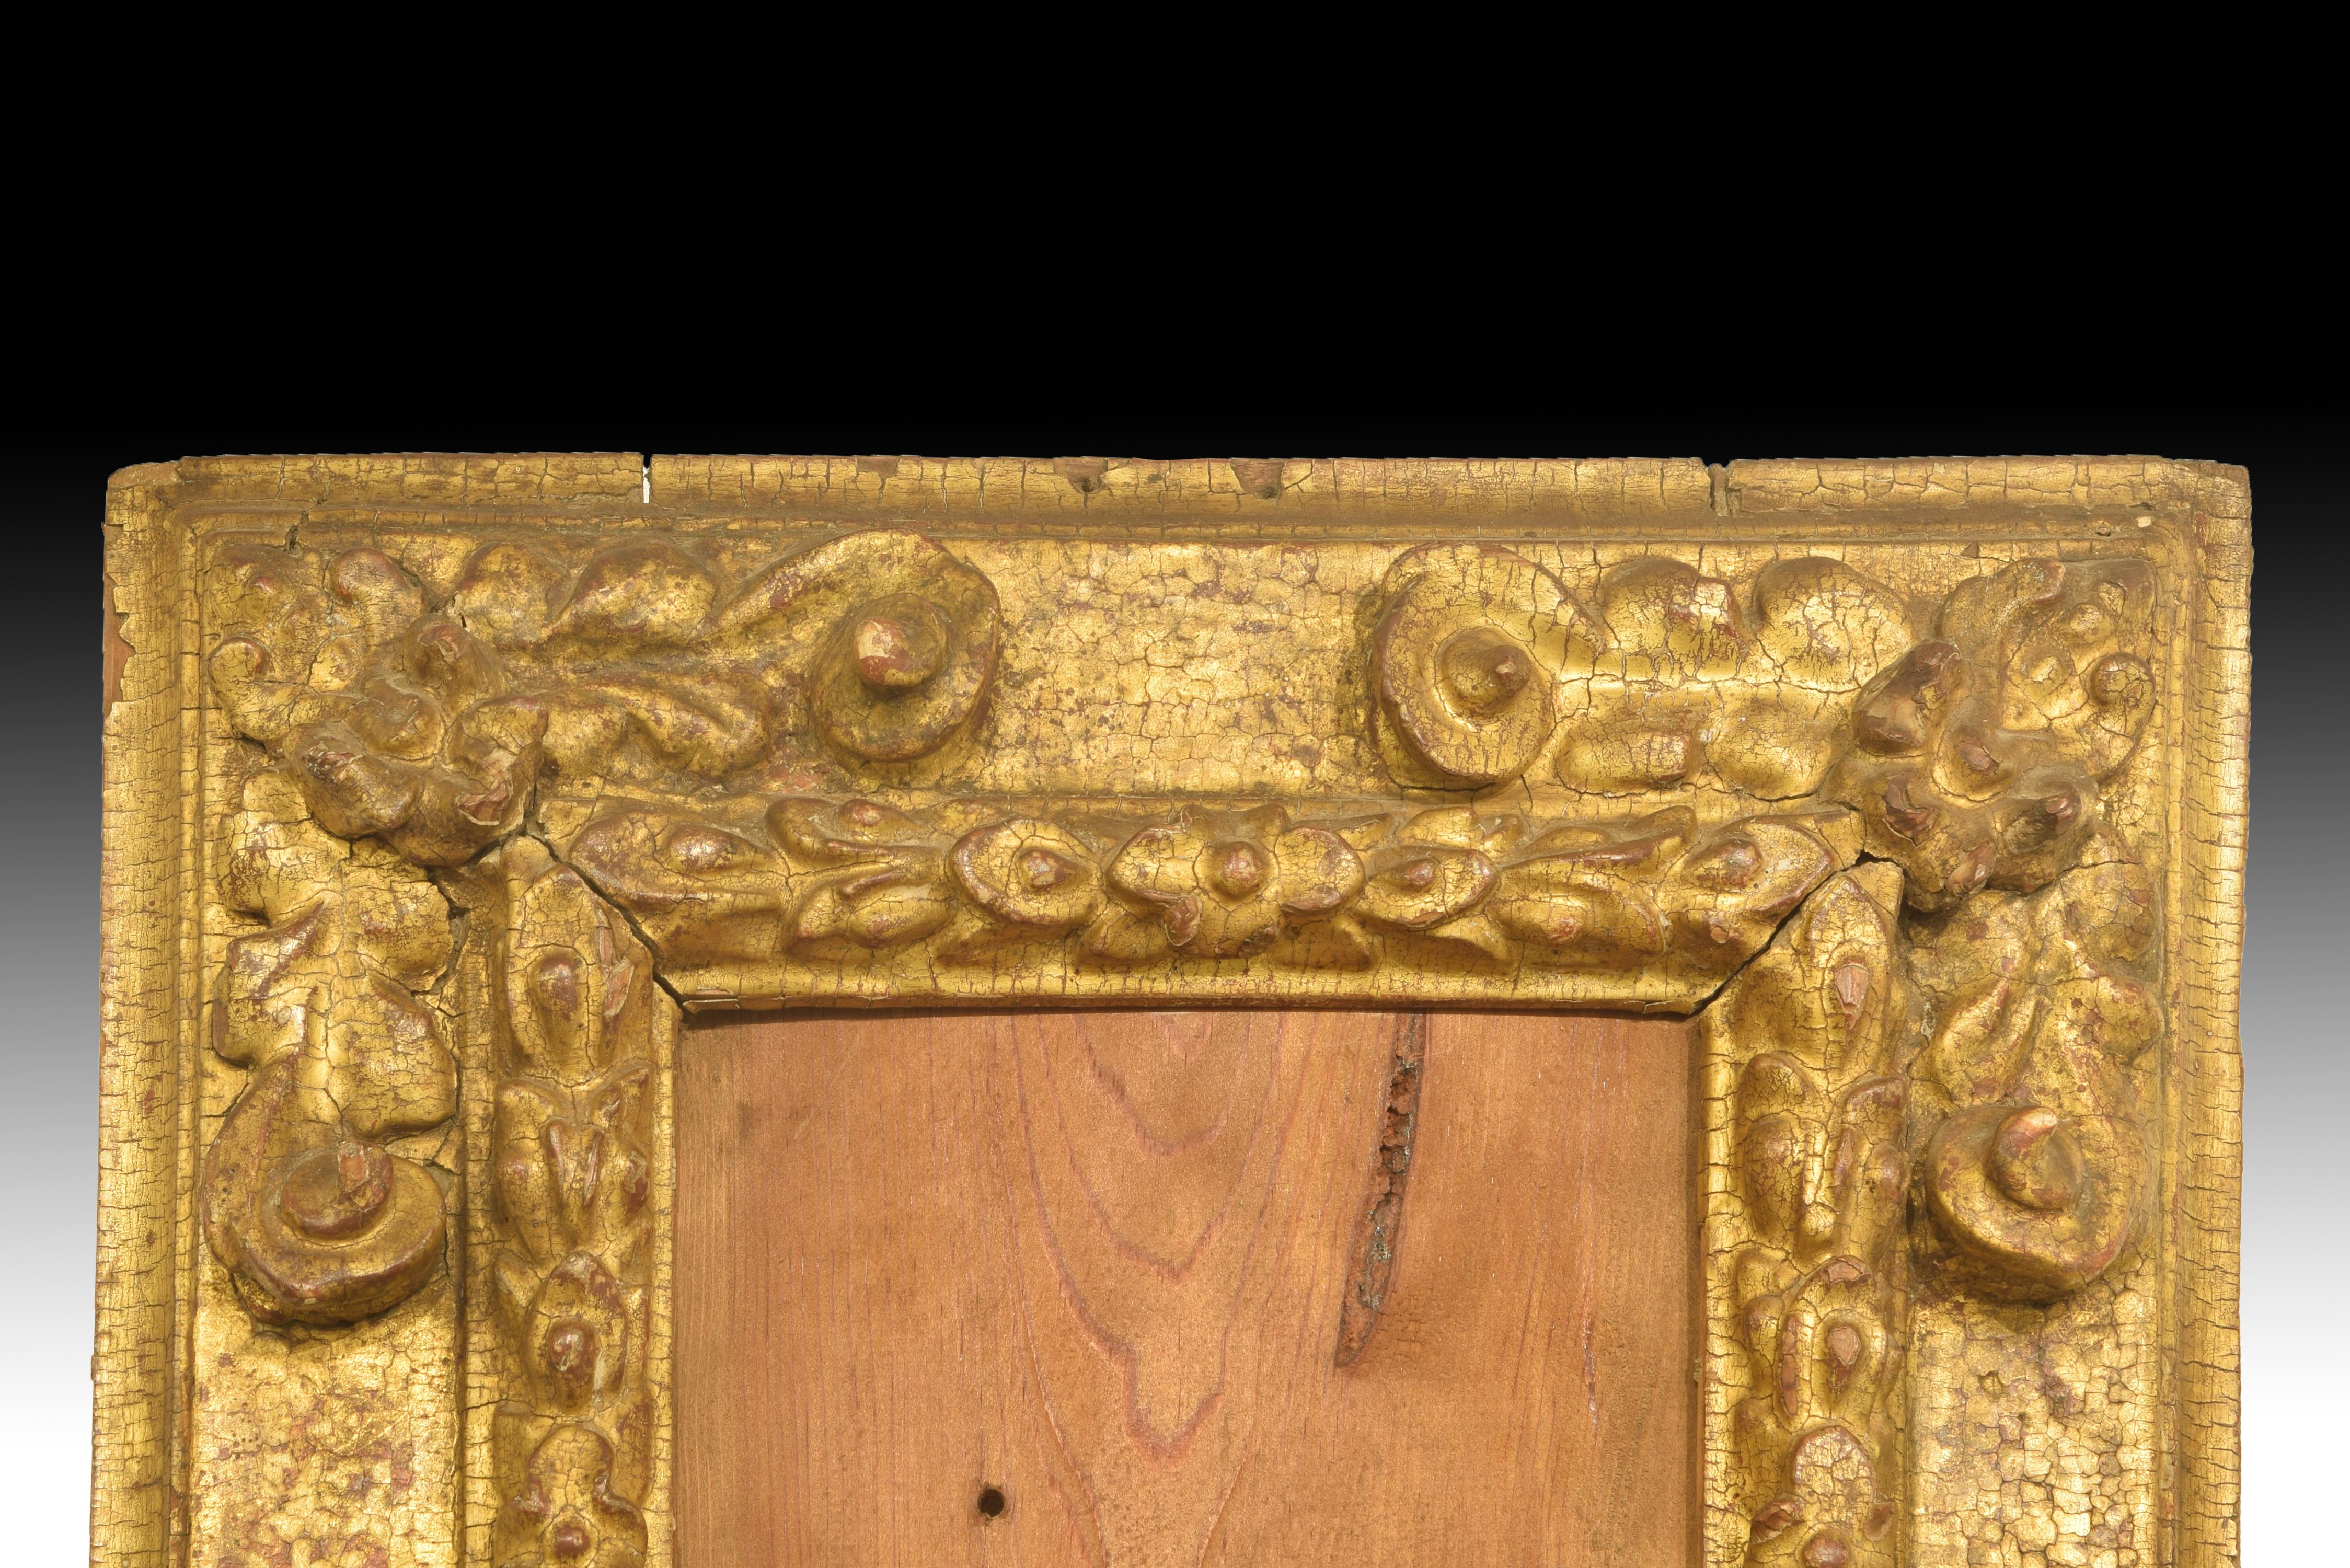 Spanish Frame, Carved and Gilded Wood, Inscription, 17th Century